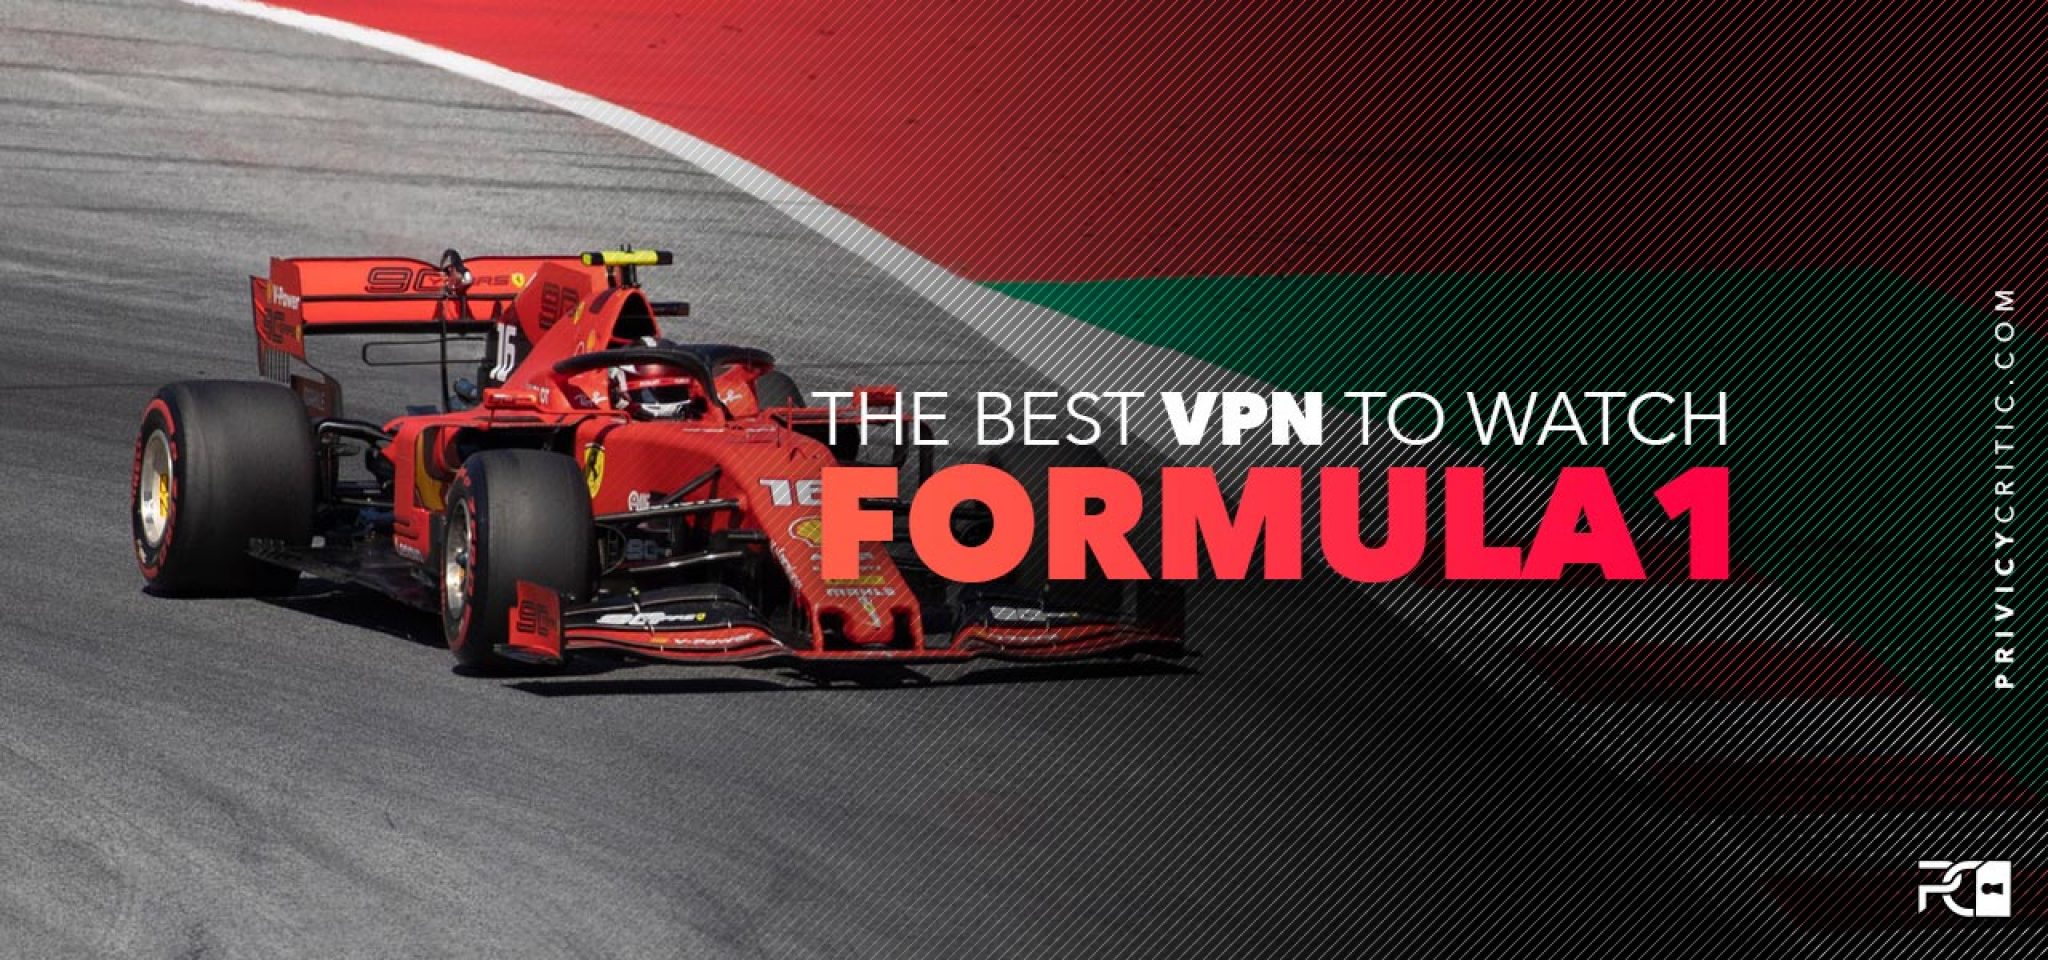 How To Watch F1 Online with a VPN